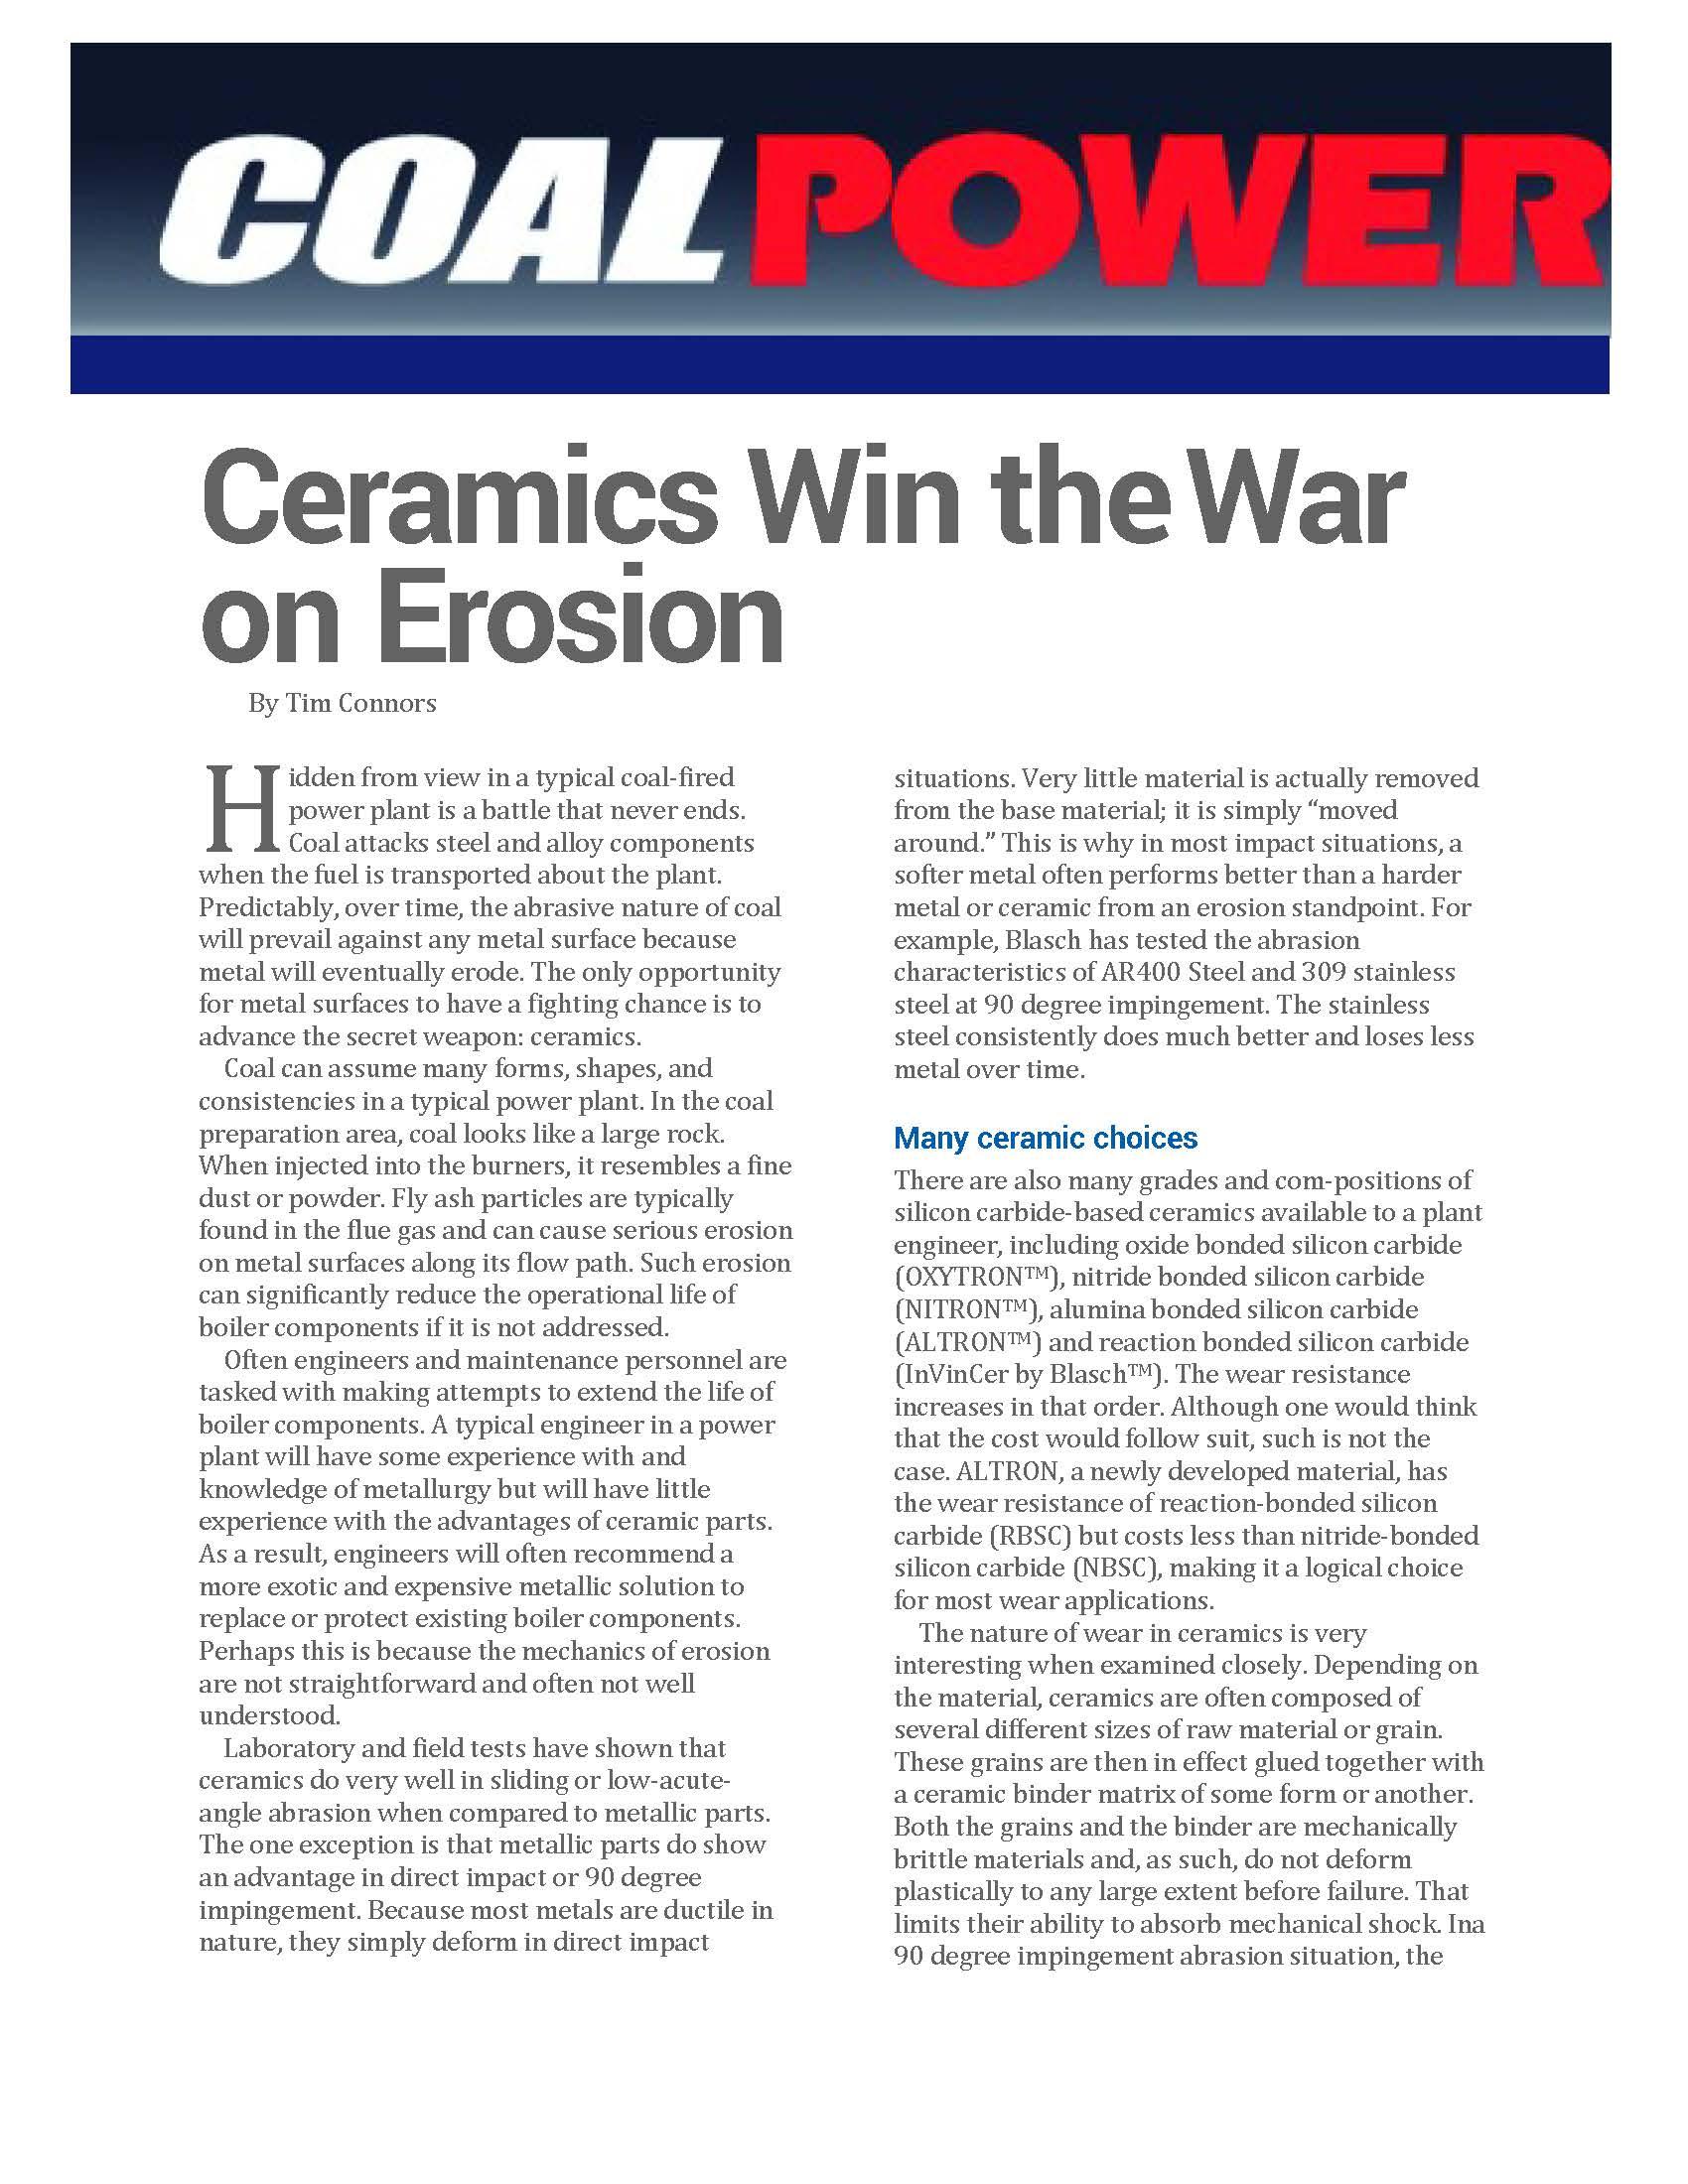 First page of "Ceramics Win the War on Erosion" white paper.